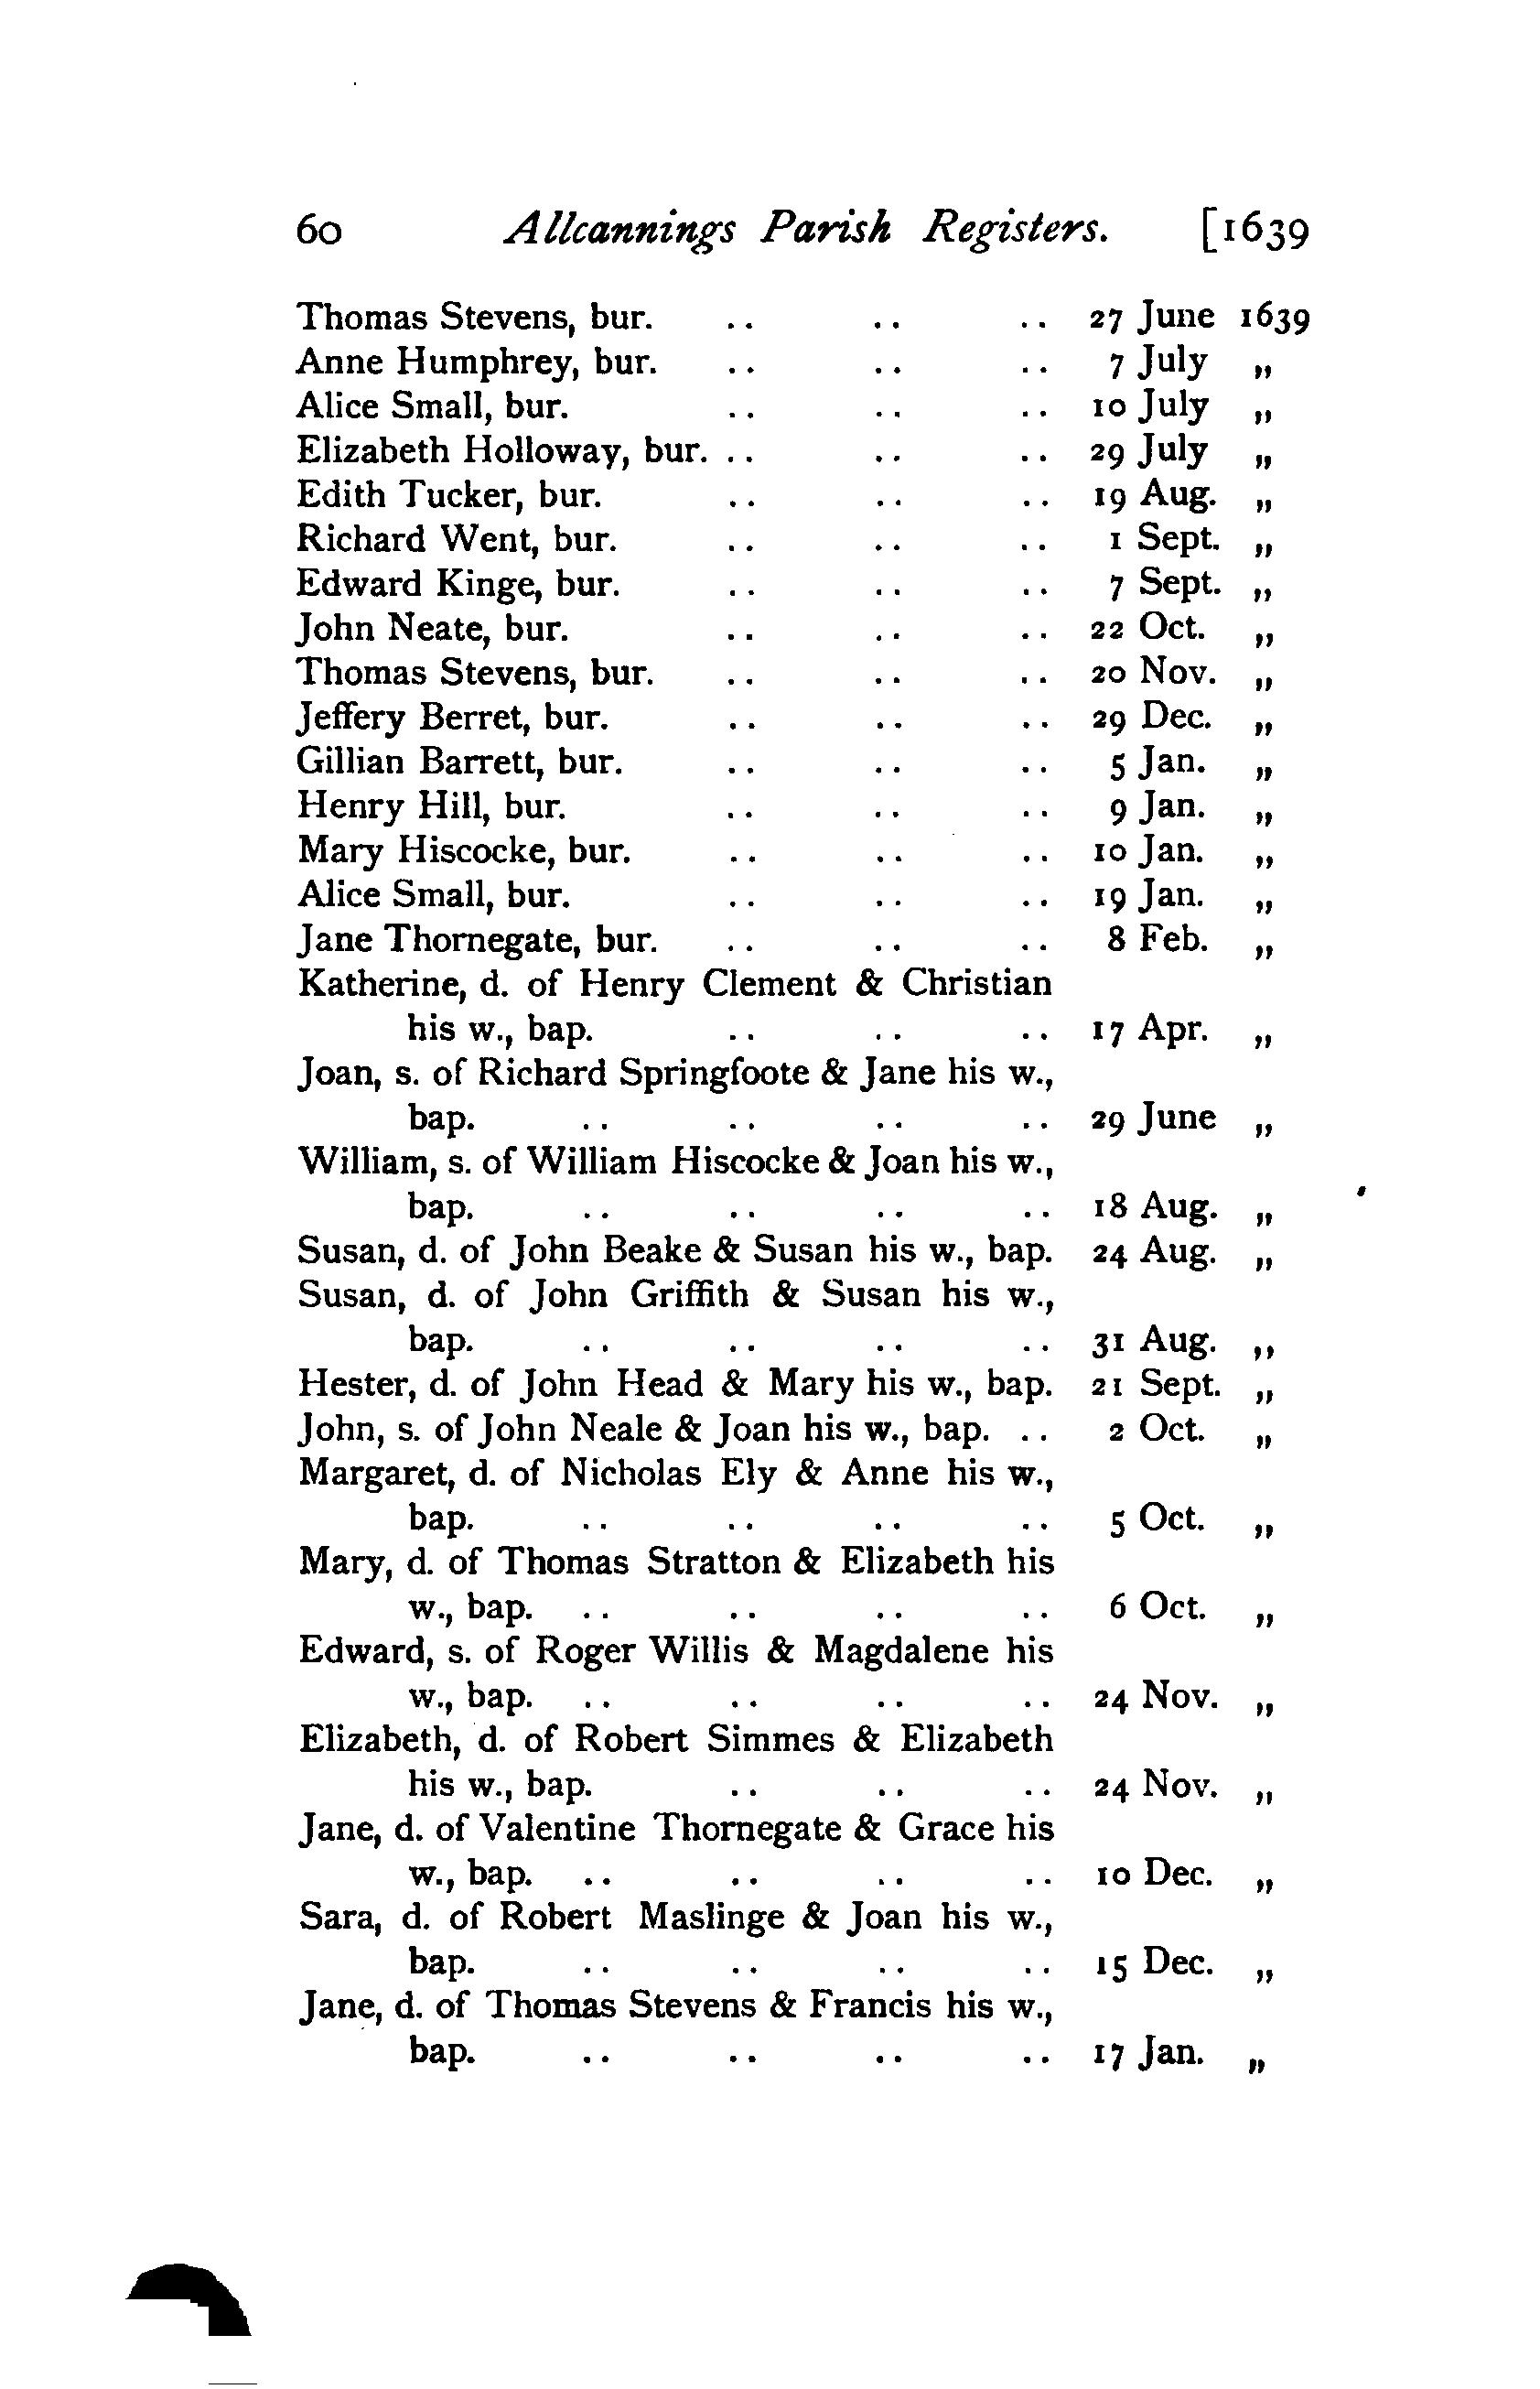 All Cannings parish registers transcribed in 1905 showing 1639 burial of Edith Tucker